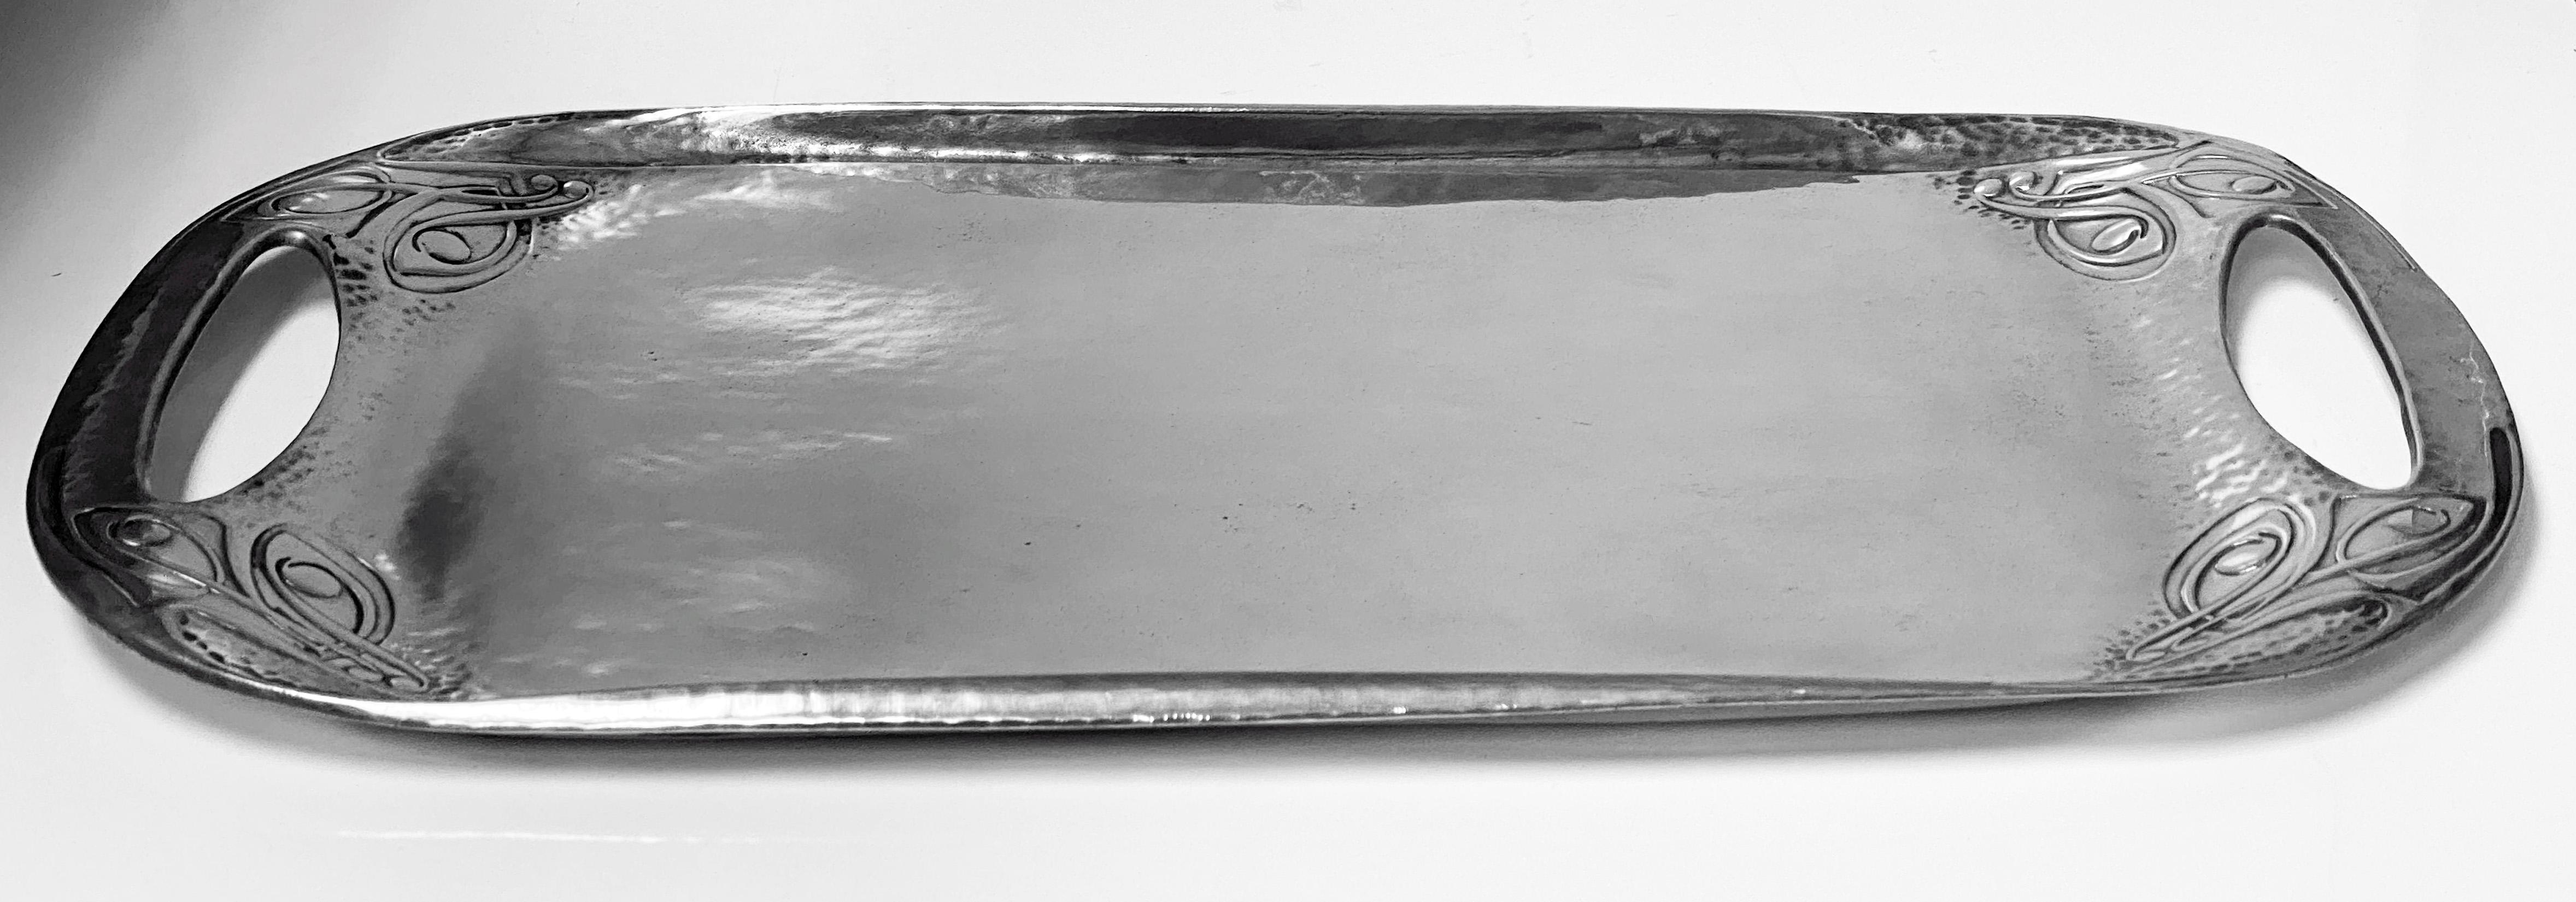 Liberty and Co hammered pewter Tray, designed by Archibald Knox, 1902-1905 design number 0309. Measures: 18.00 x 9.75 inches. The tray centre plain with open kidney handles and cornices of intertwining celtic knot decoration. Liberty Tudric marks